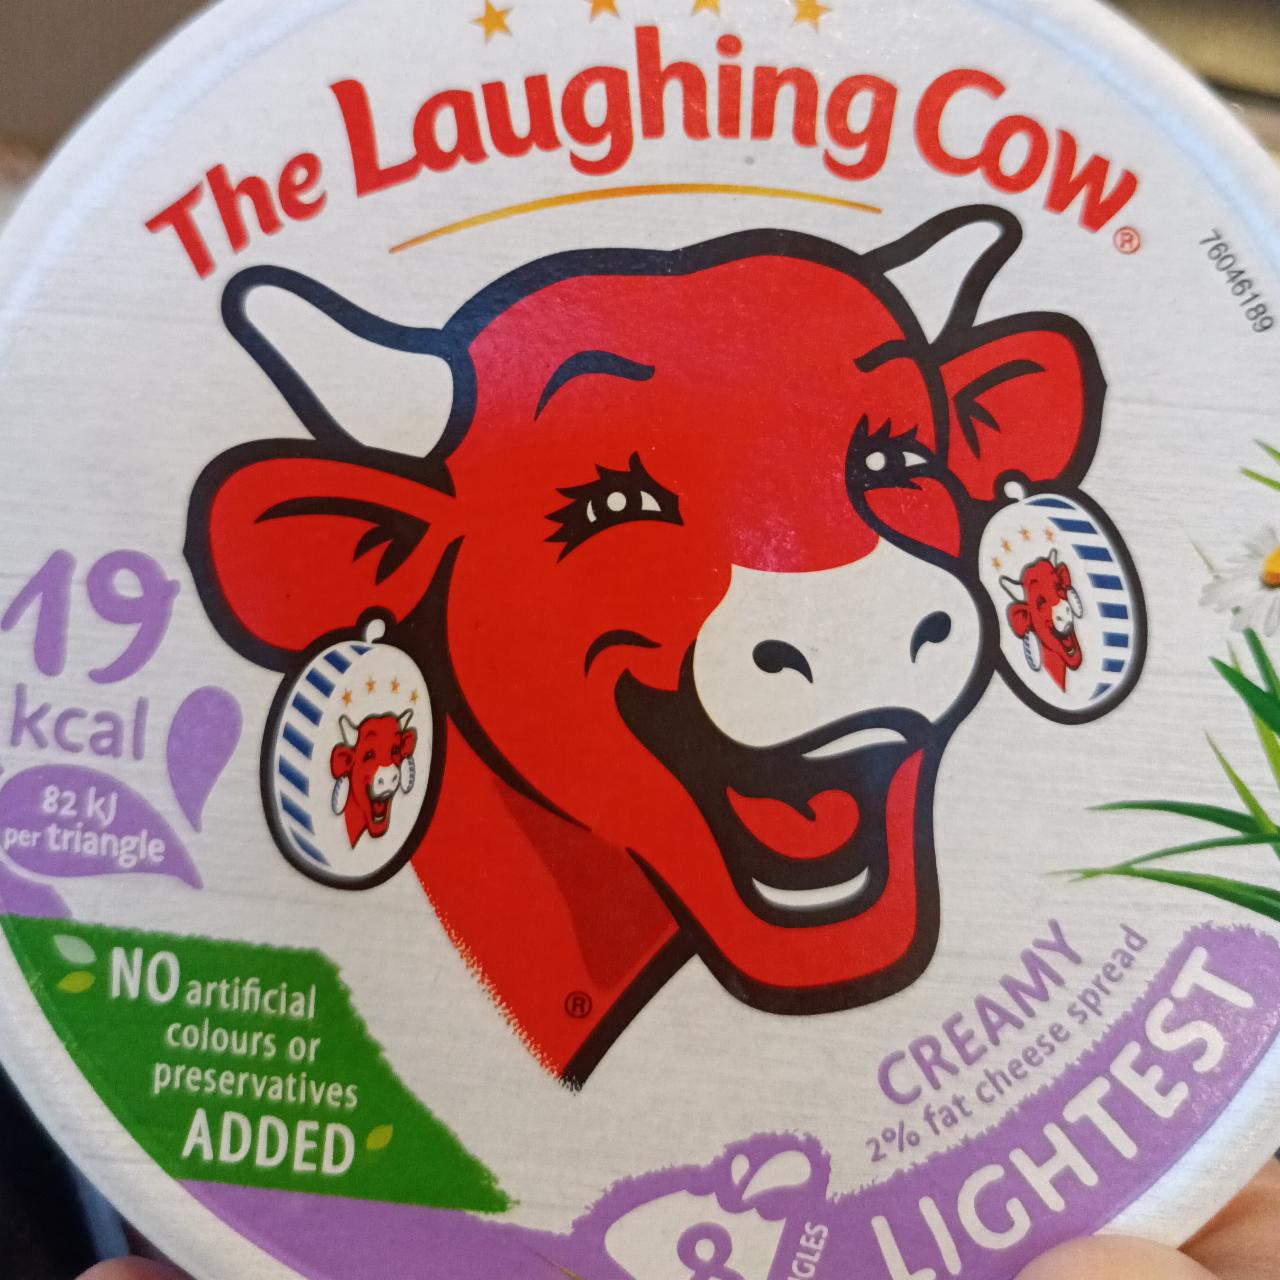 Fotografie - Creamy Lightest 2% fat The Laughing Cow